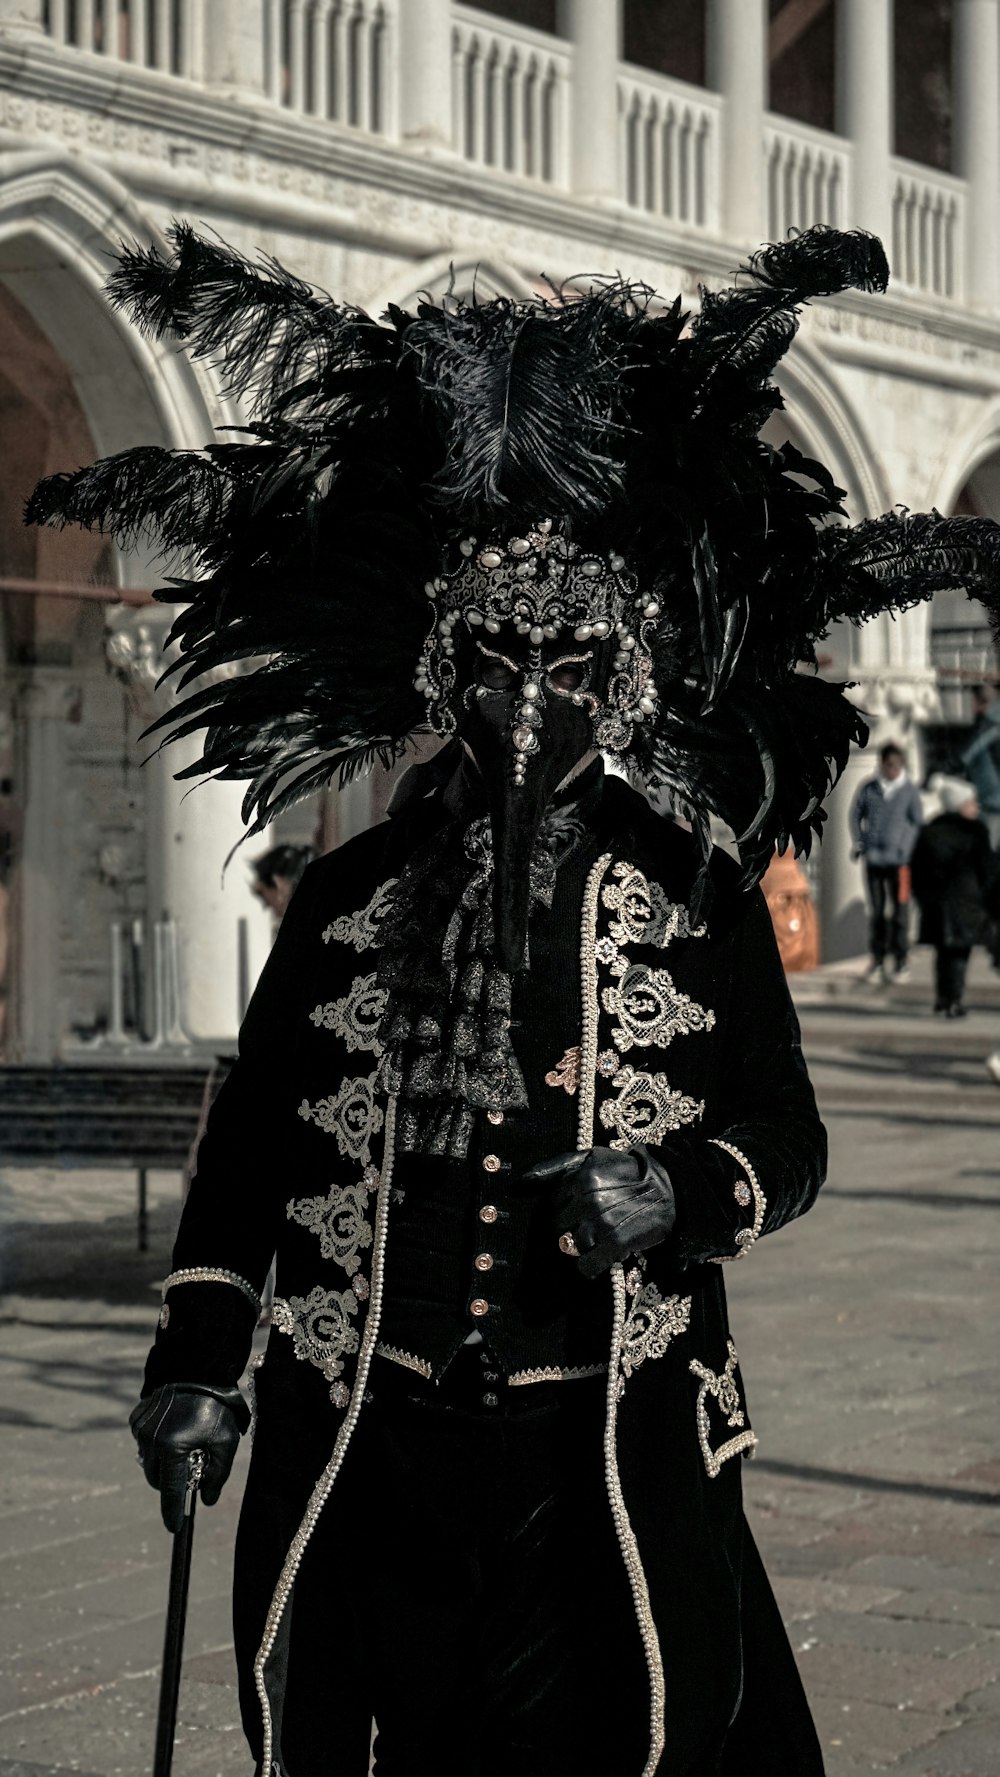 a man dressed in a black and white costume